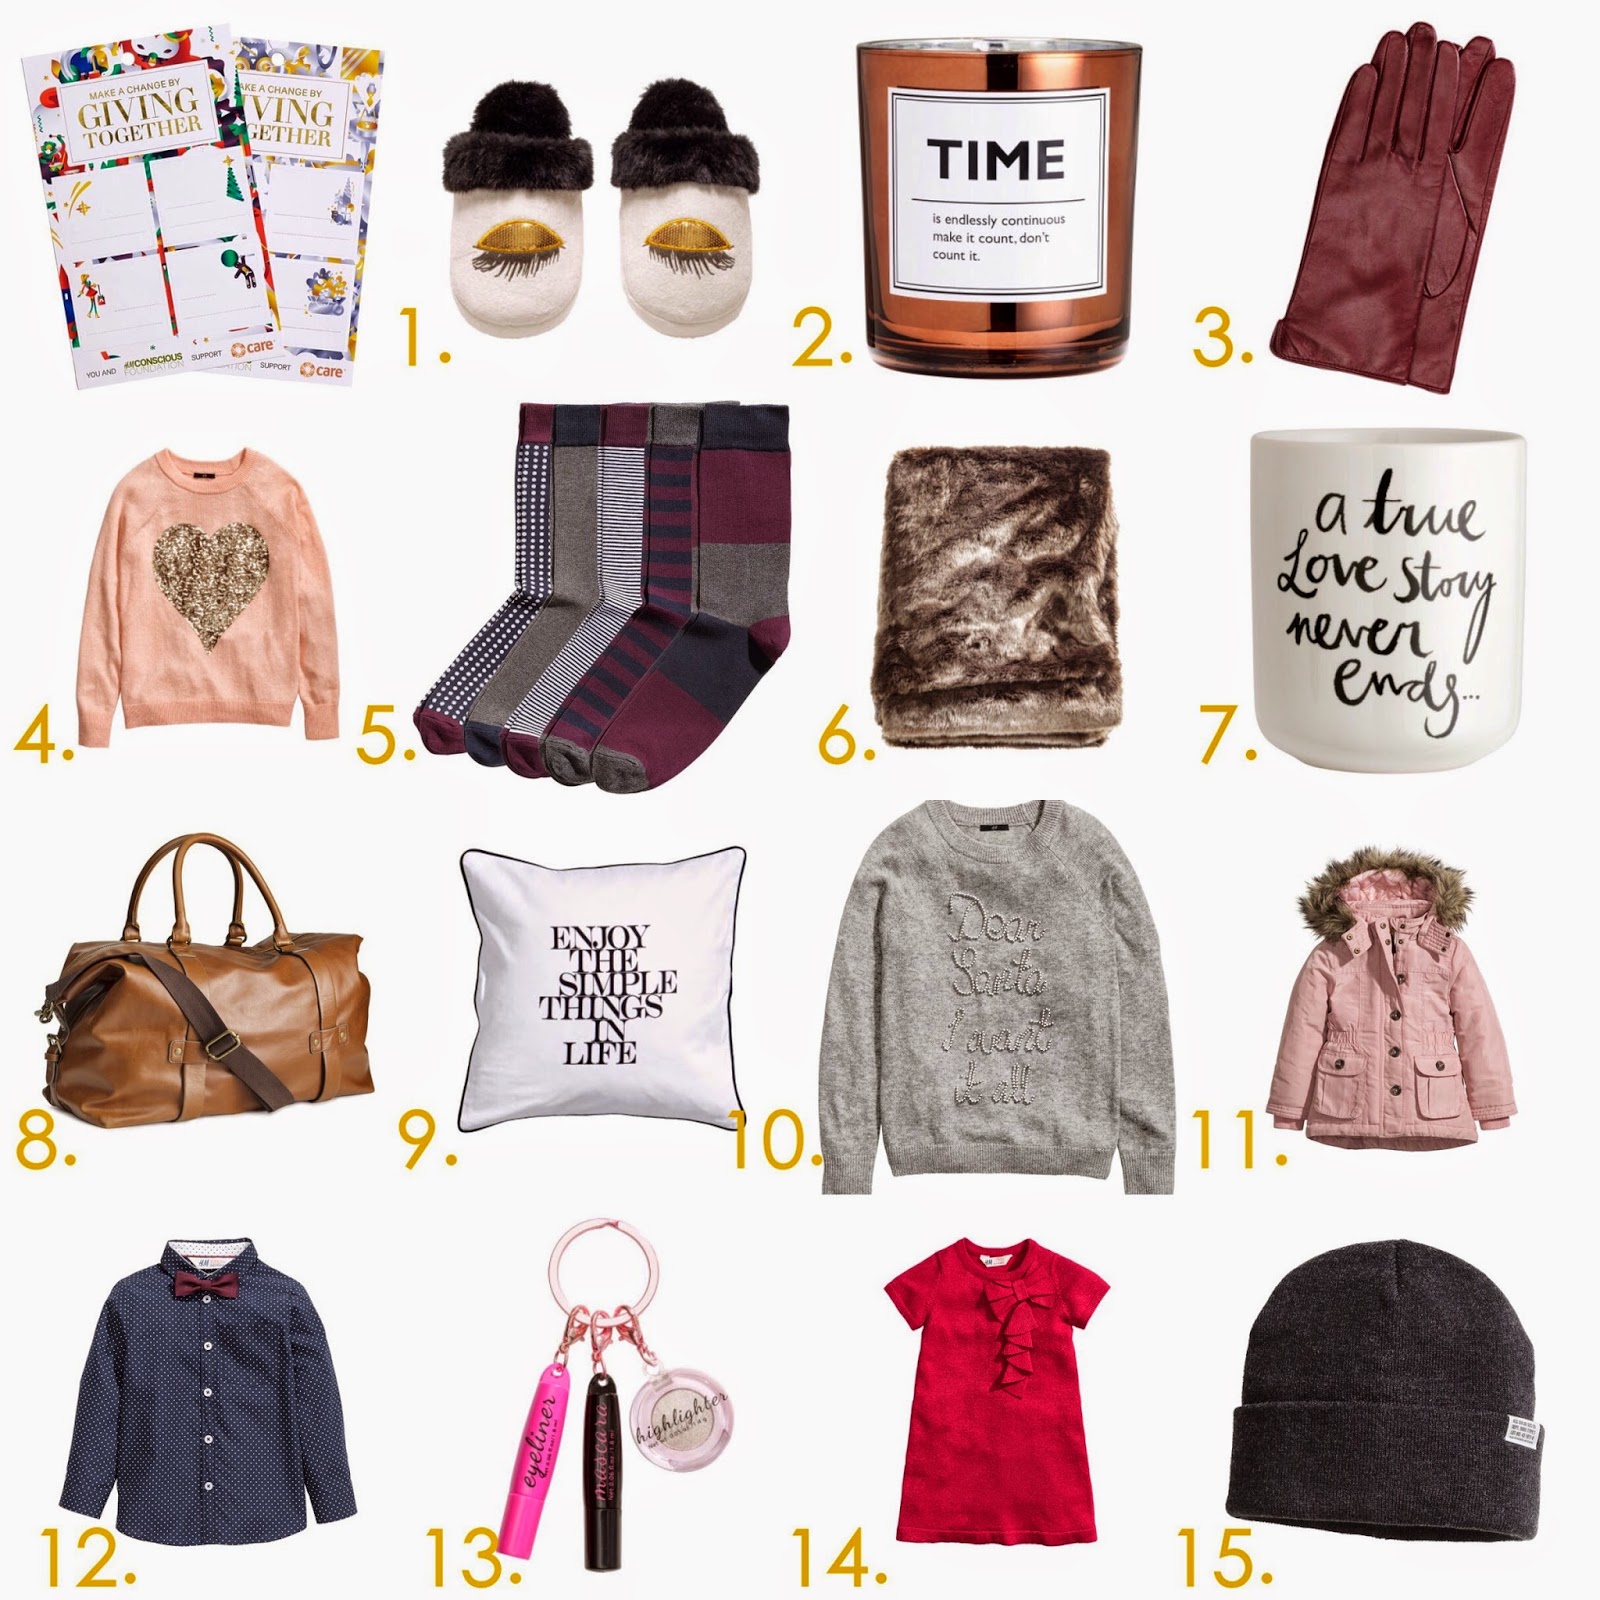 Gift Guide and CARE giving with H&M